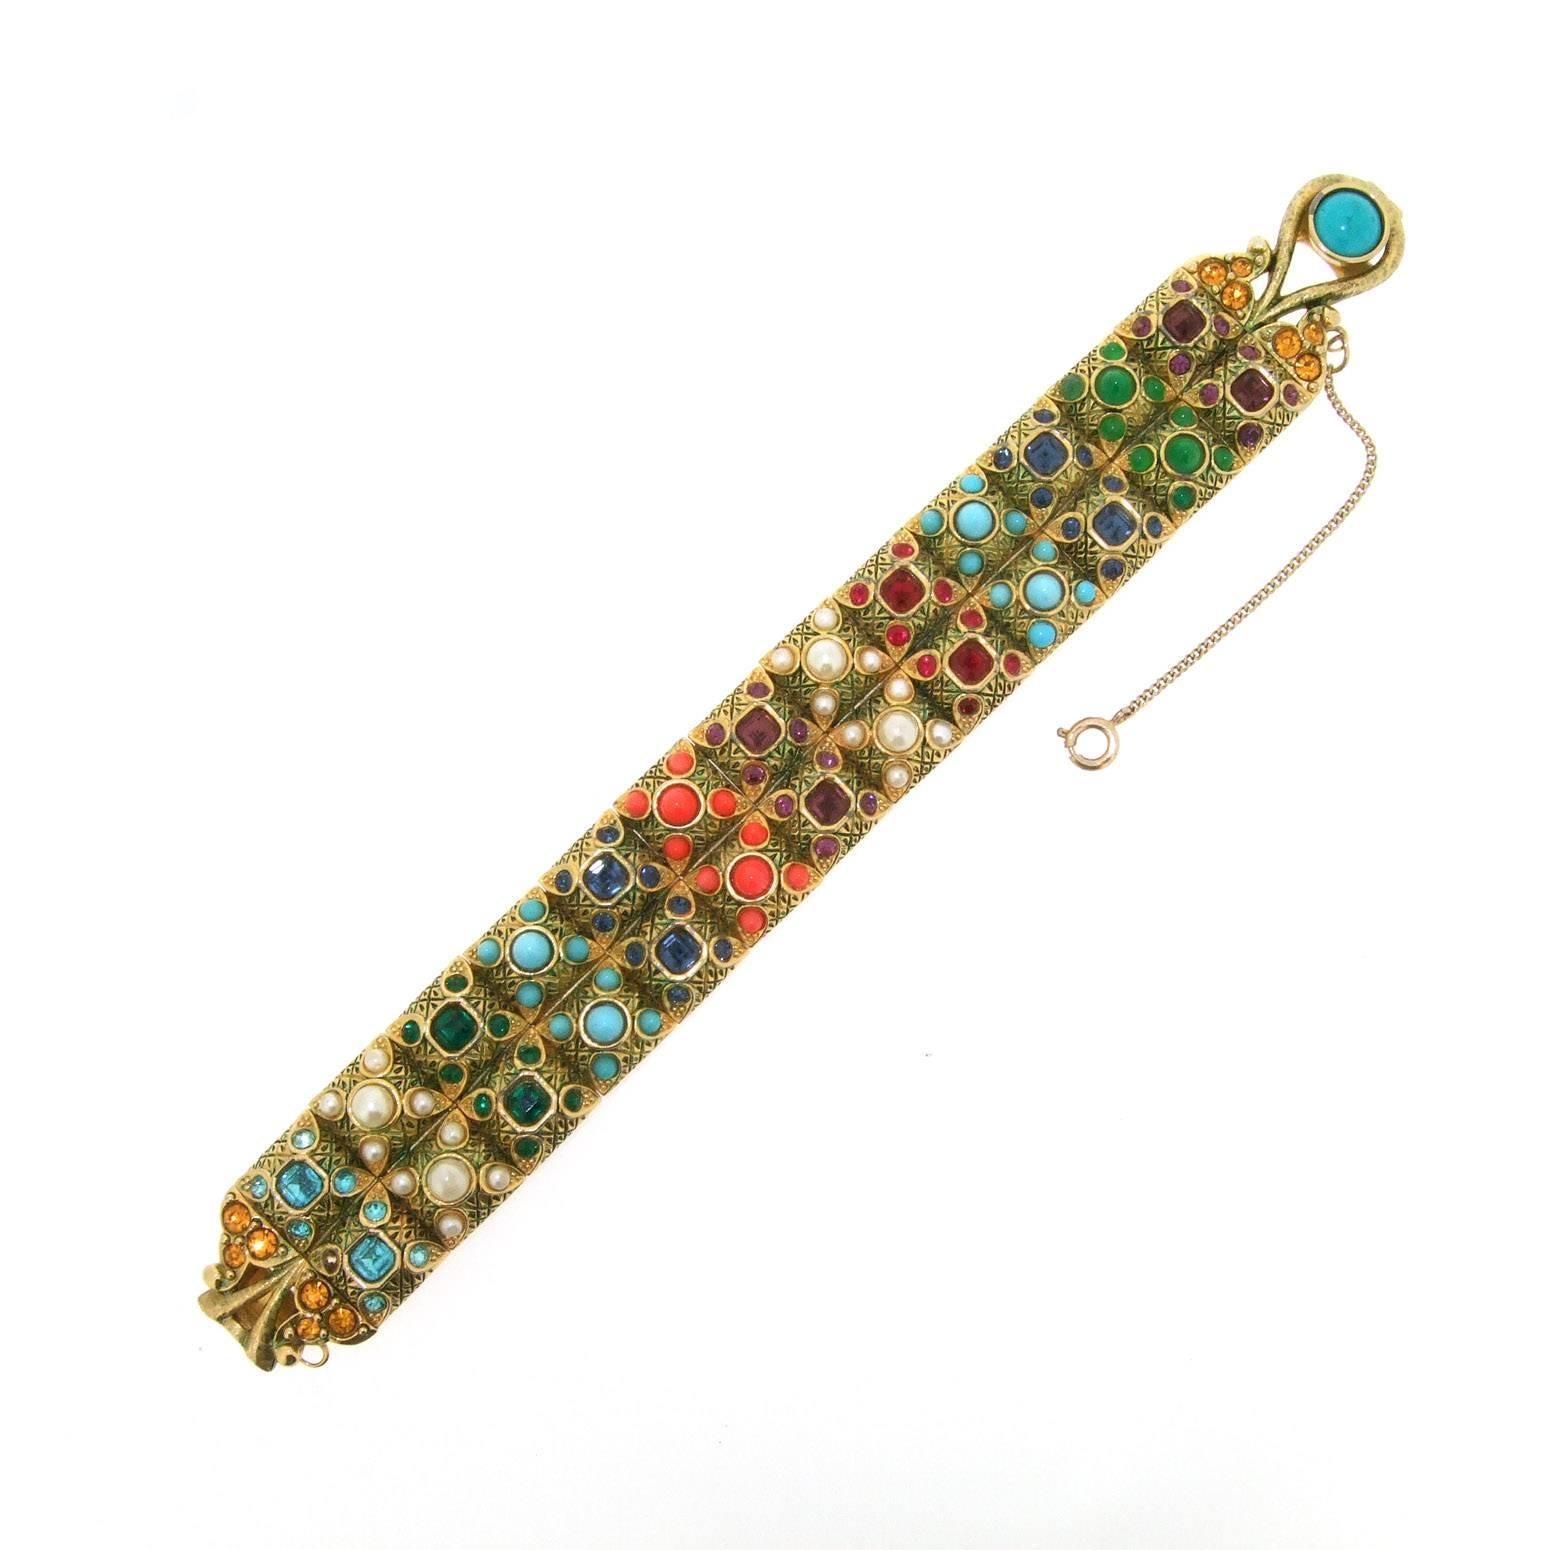 A beautiful vintage bracelet from the 1960s by Boucher, in gold tone costume metal set with rainbow coloured glass and crystals. 

It measures 7 inches/ 18cm around the wrist, 2.1cm wide, 0.9cm deep.

